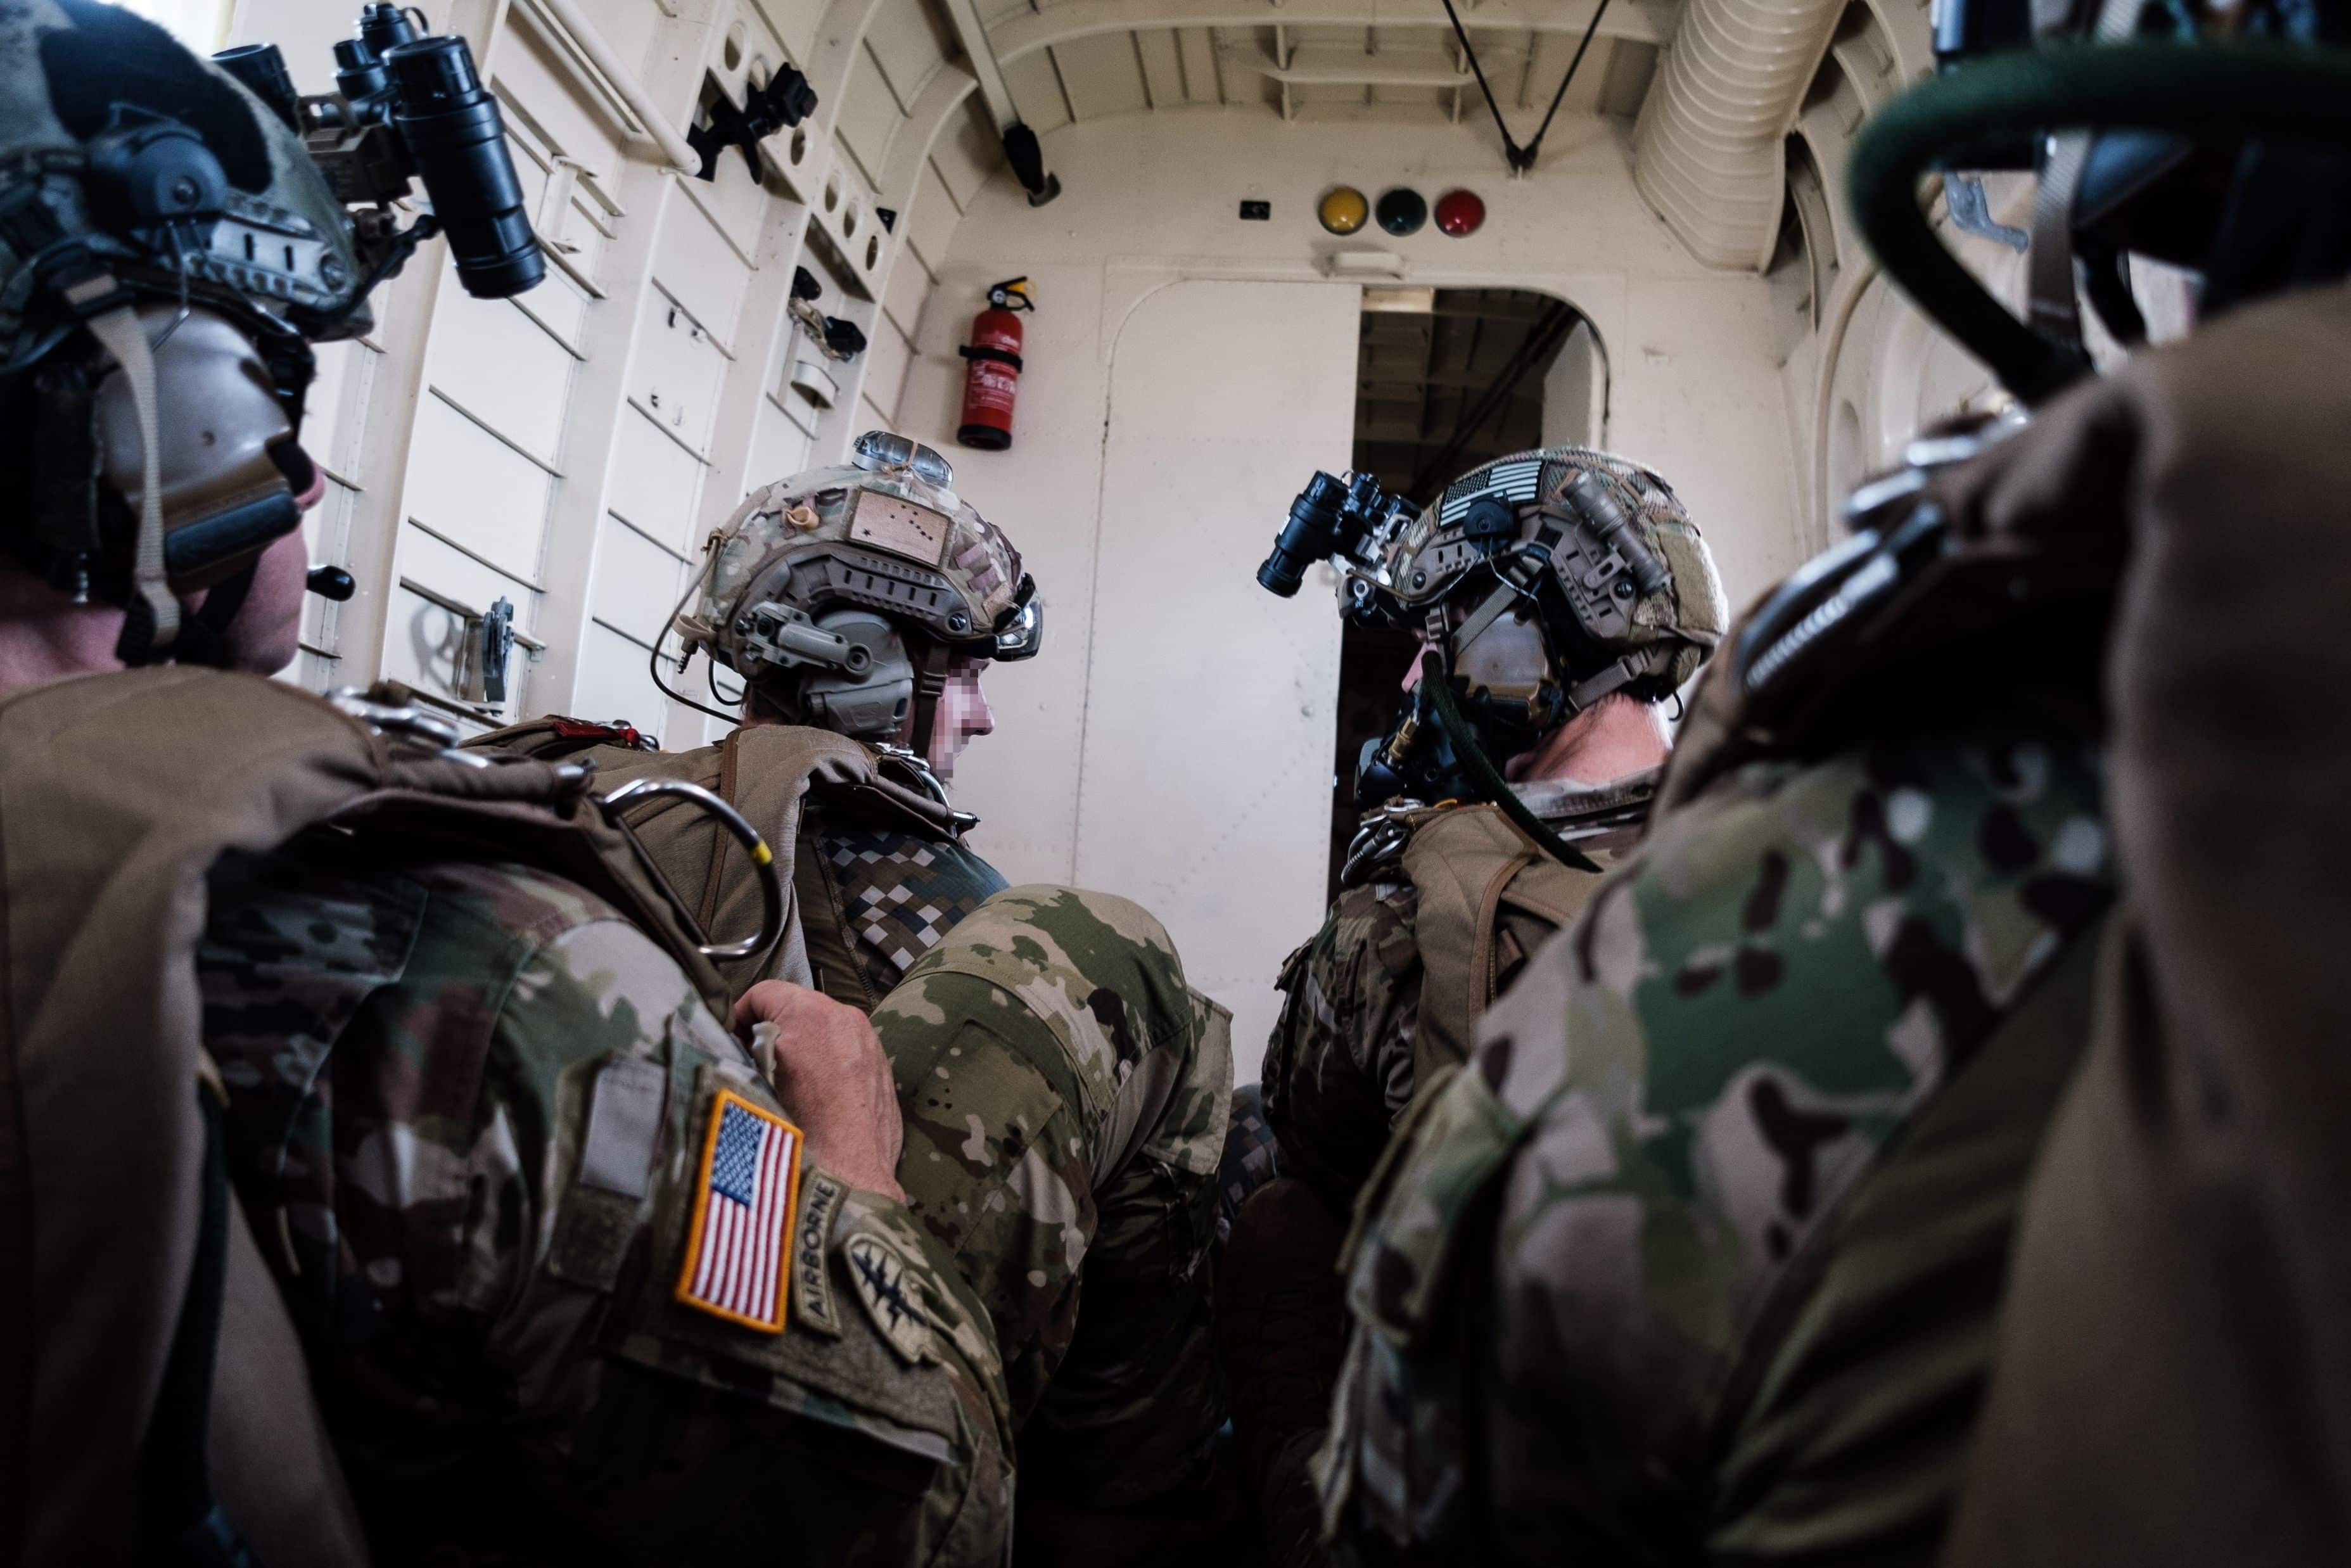 A Latvian Special Operations Unit operator, left, confers with his U.S. Army Special Forces counterpart prior to a high-altitude, low-opening jump over Latvia on 18 June 2020. The Latvian and U.S. Special Forces jumped from a Latvian Air Force Antonov AN-2 transport aircraft.